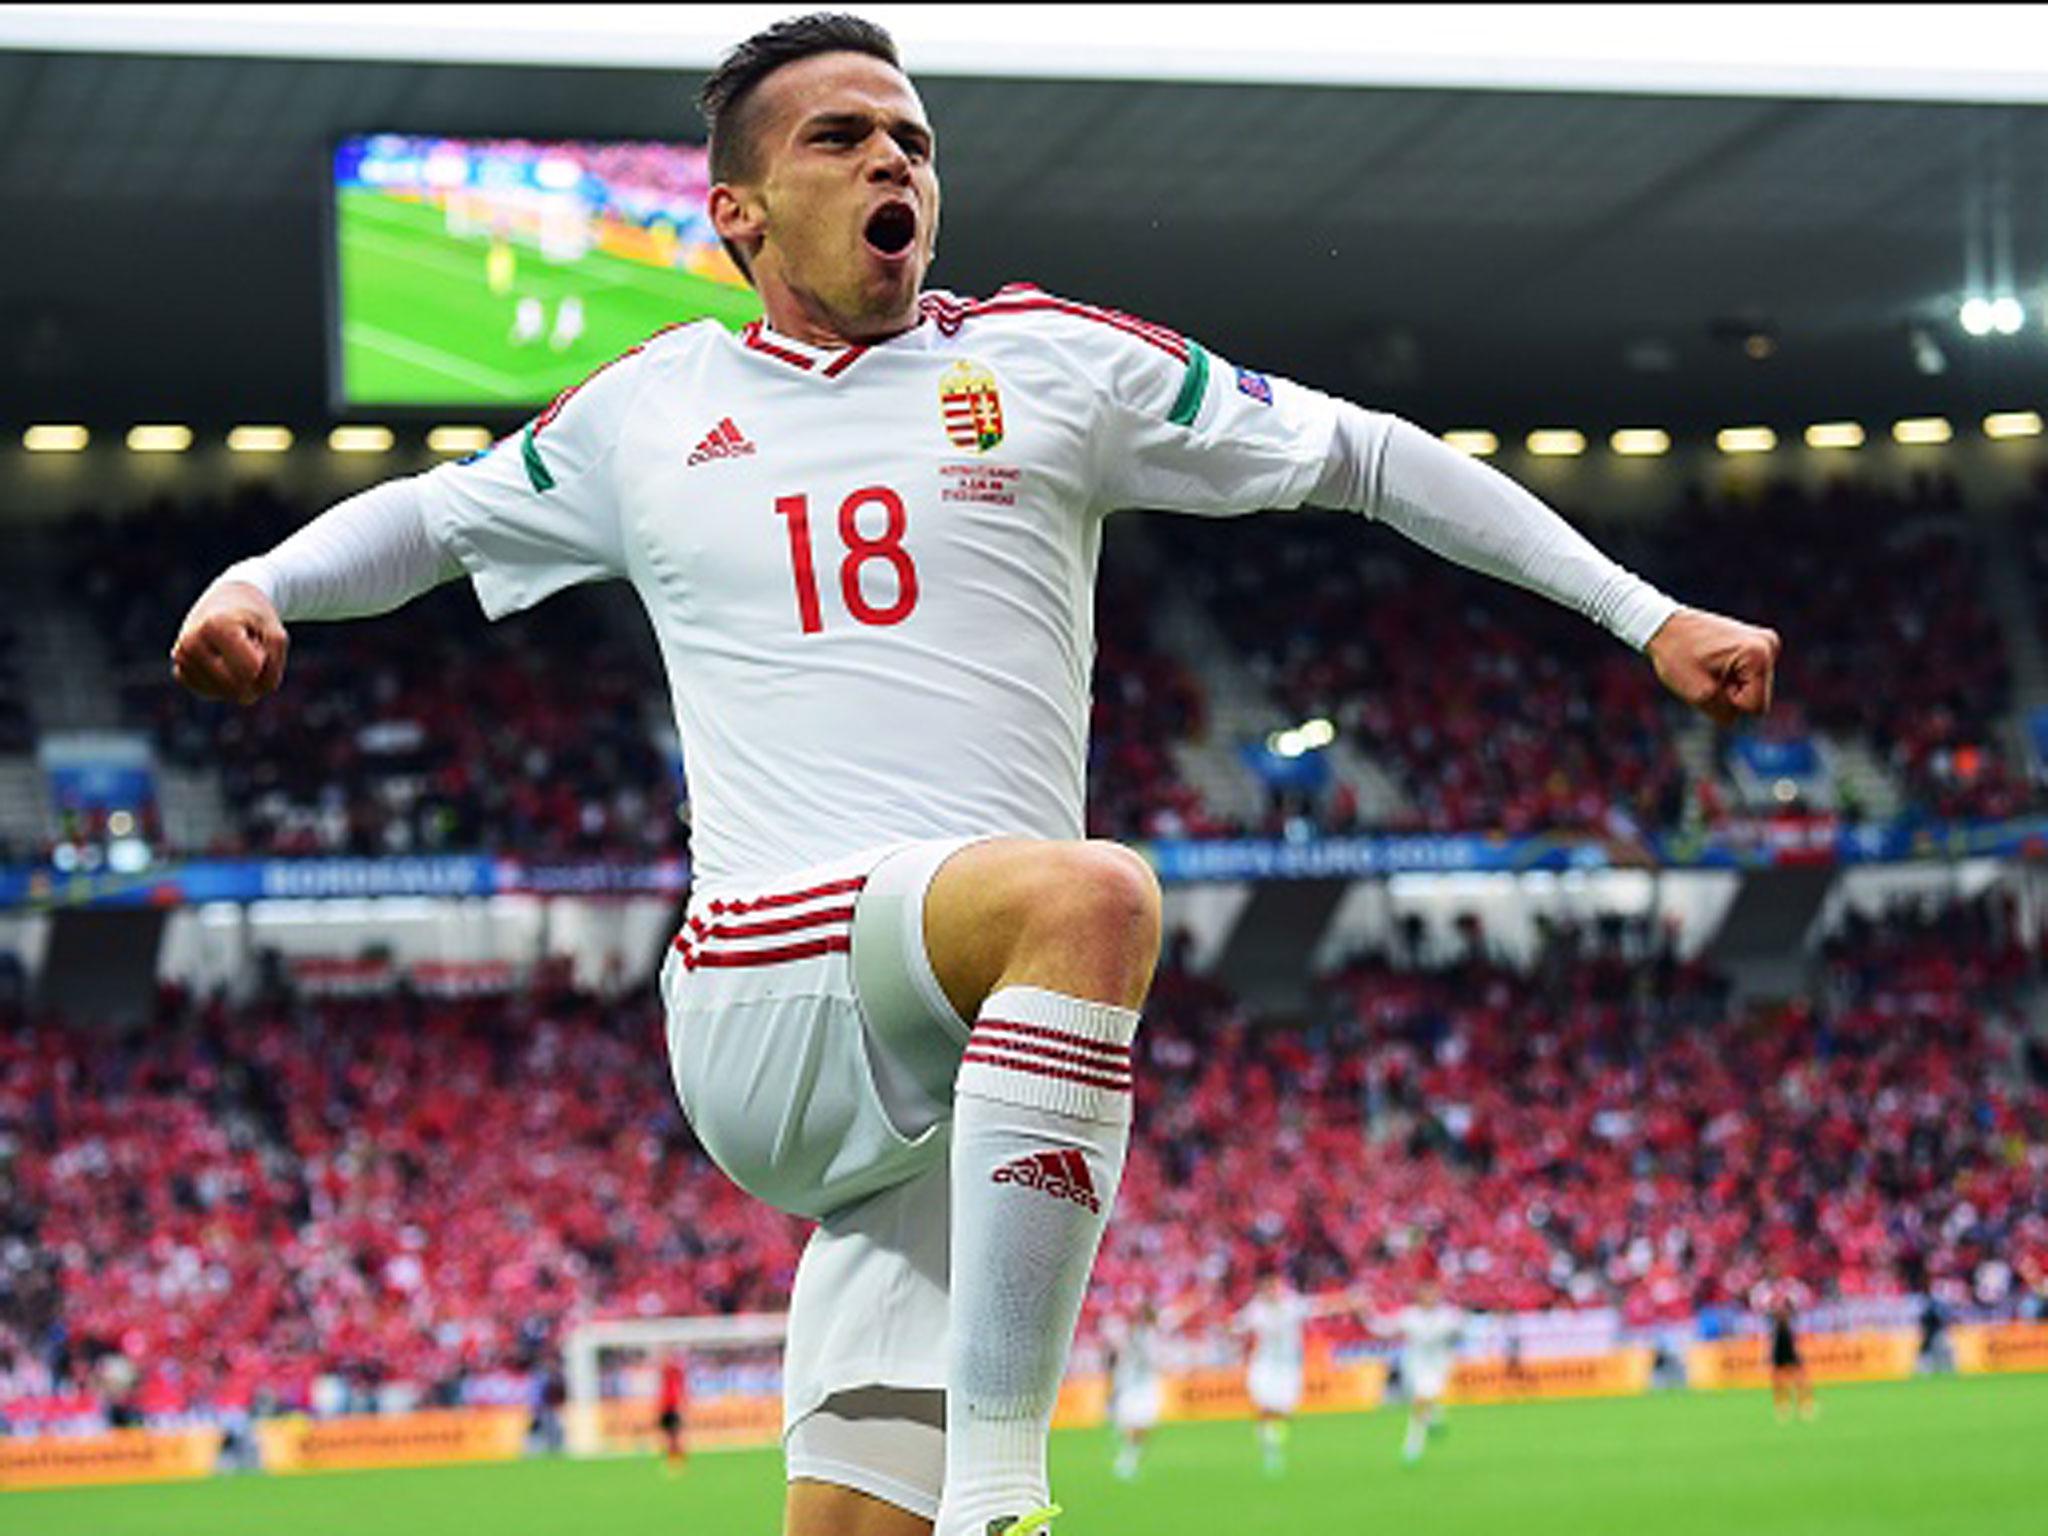 Zoltan Stieber celebrates his goal that secured the victory for Hungary (Getty)